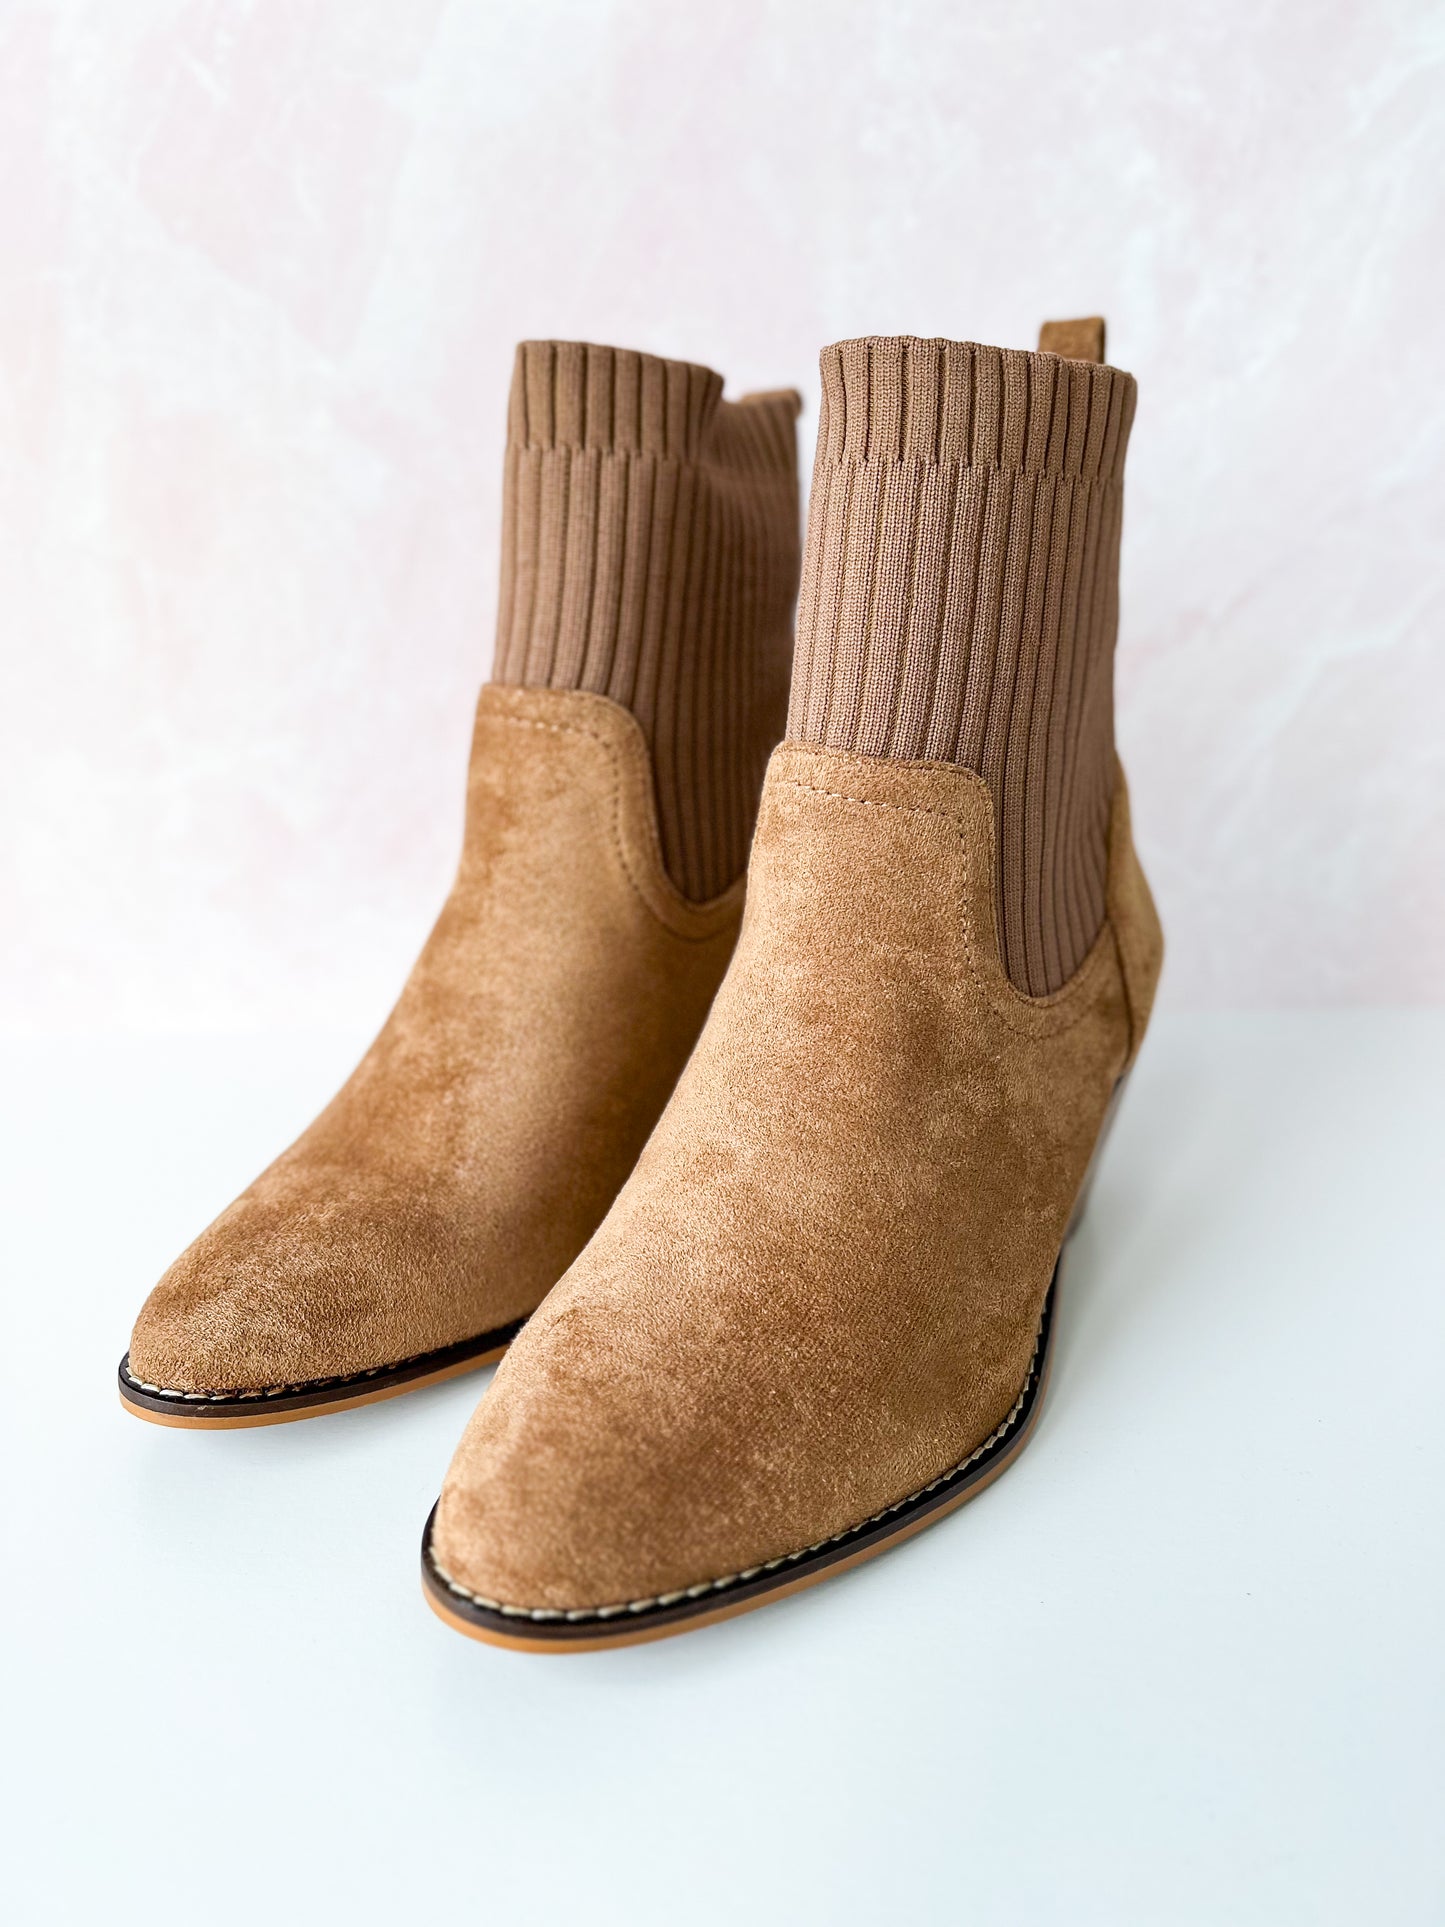 Corky's Crackling Boot - Camel Suede